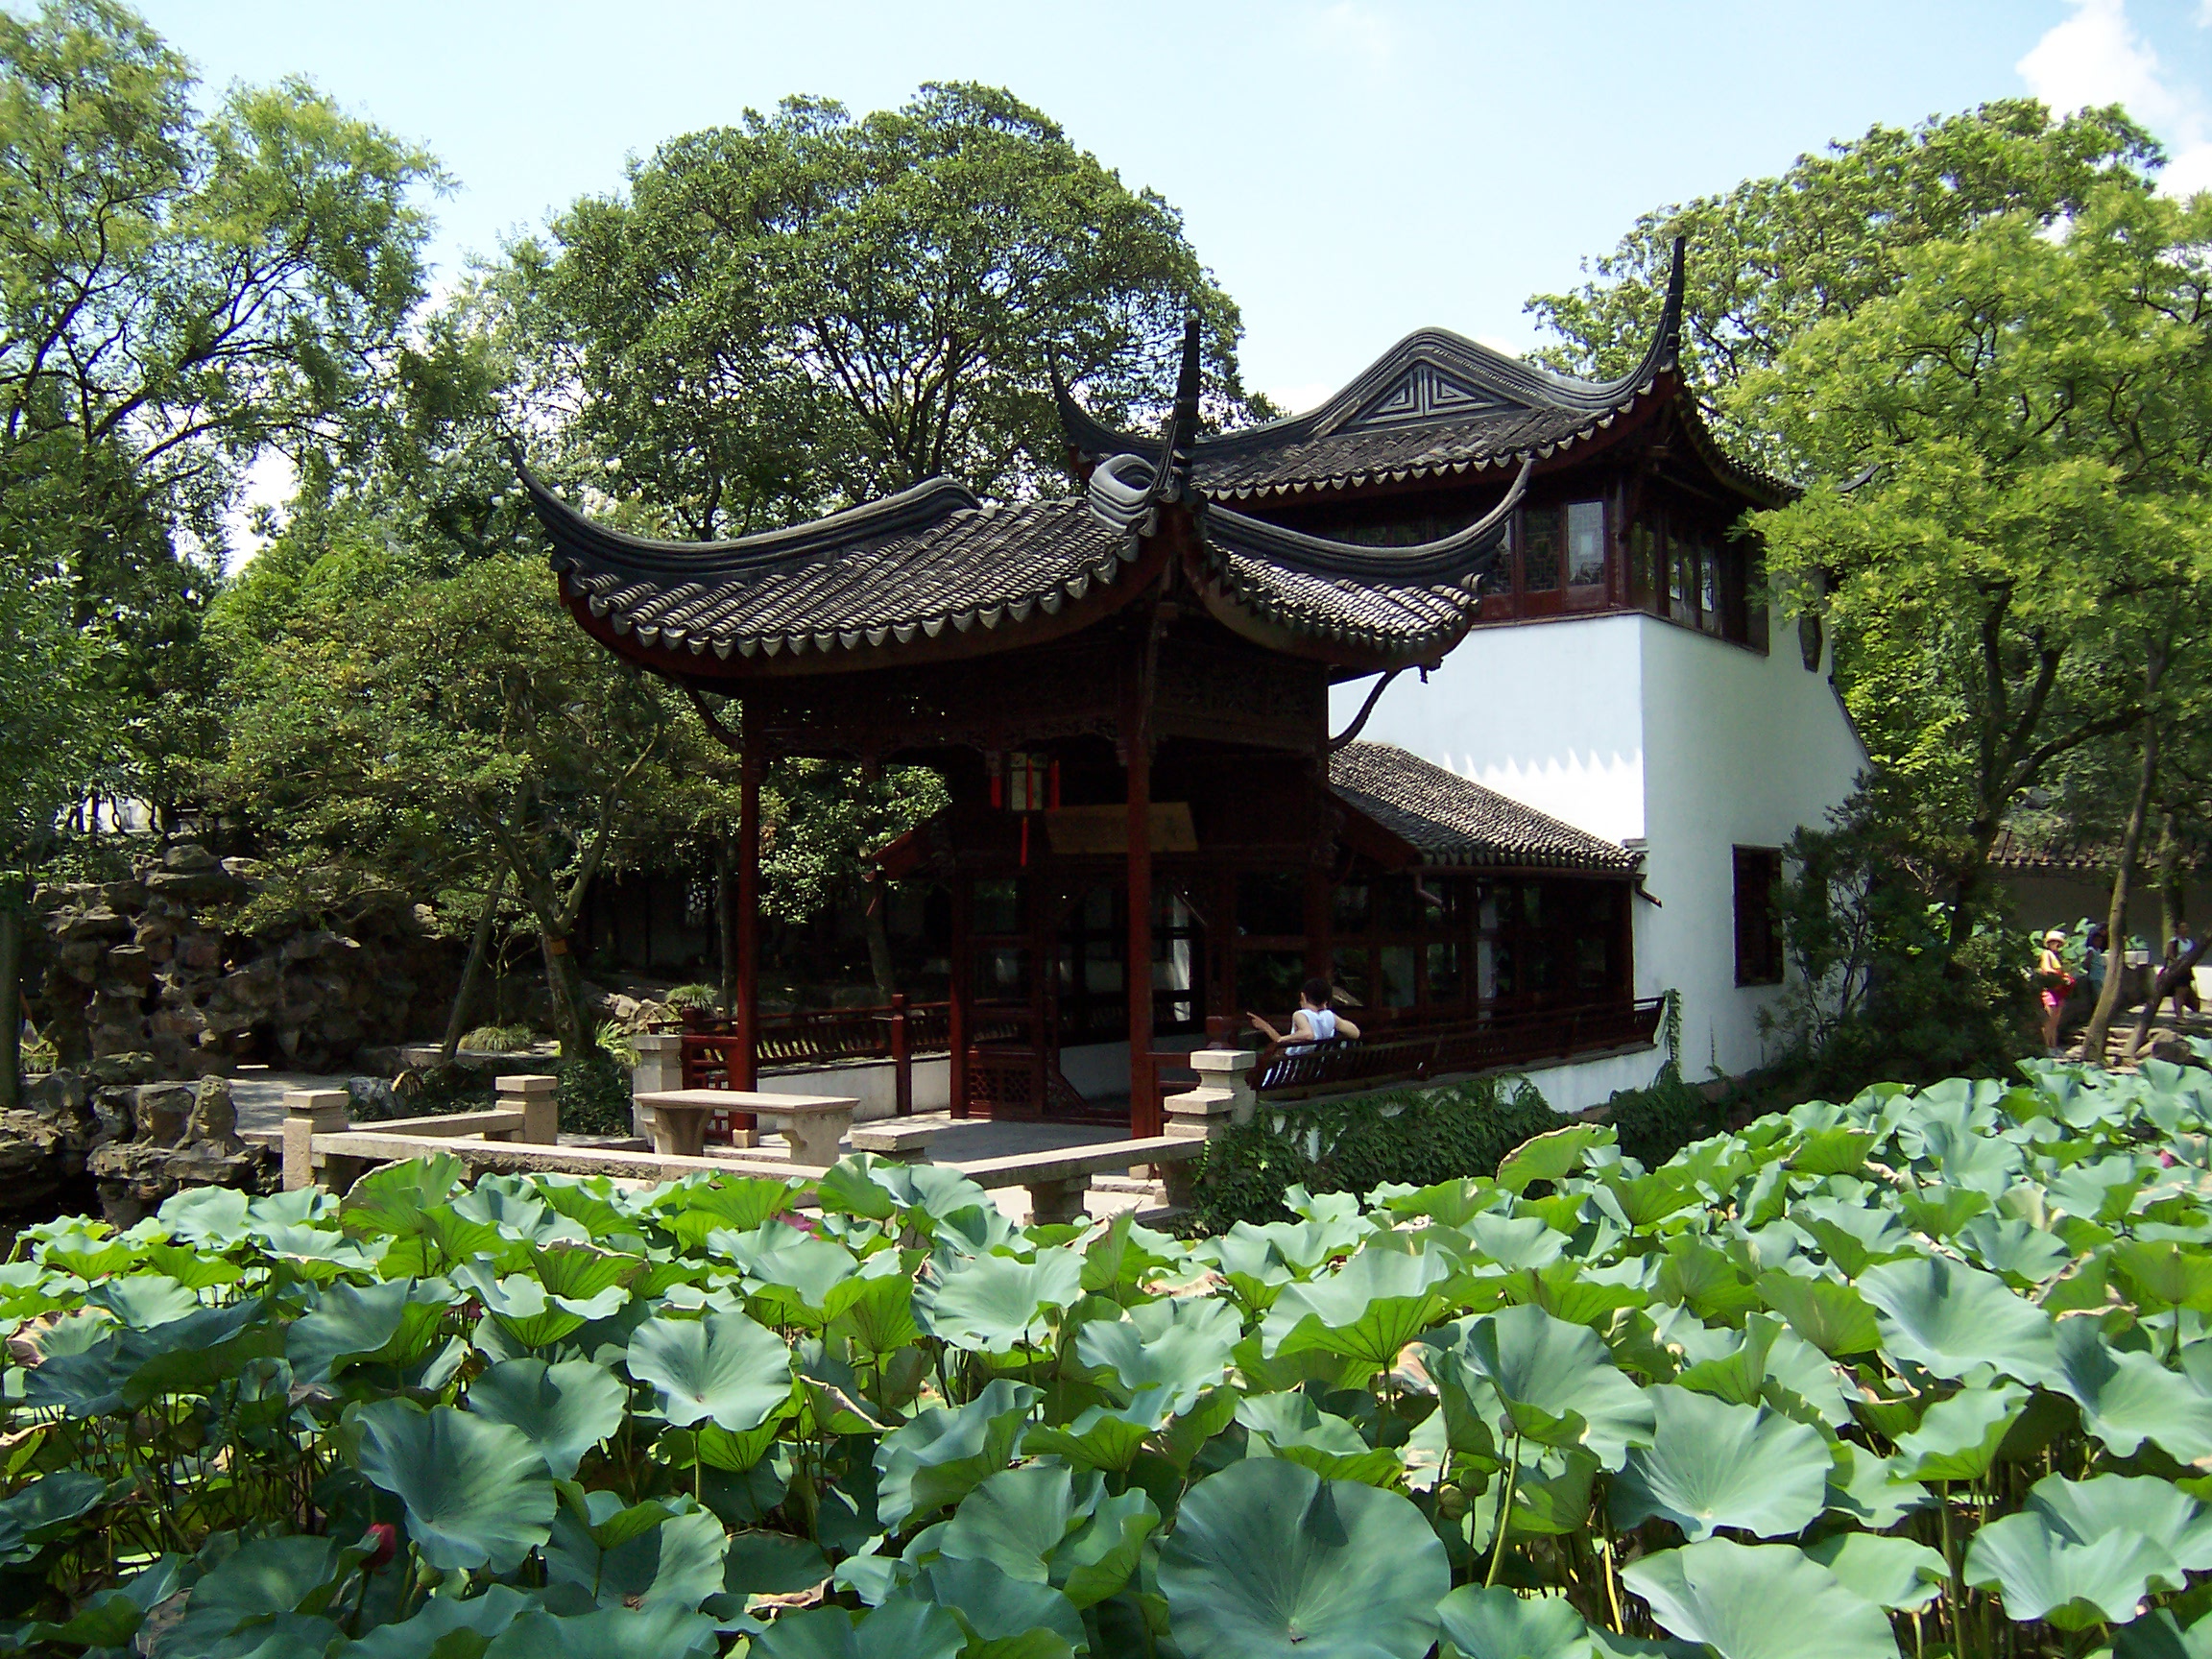 Garden of the Unsuccessful Politician (Distant Fragrance Hall), ca. 1500-1535 (Suzhou, China). Photo by 外史公, CC BY-SA 3.0.